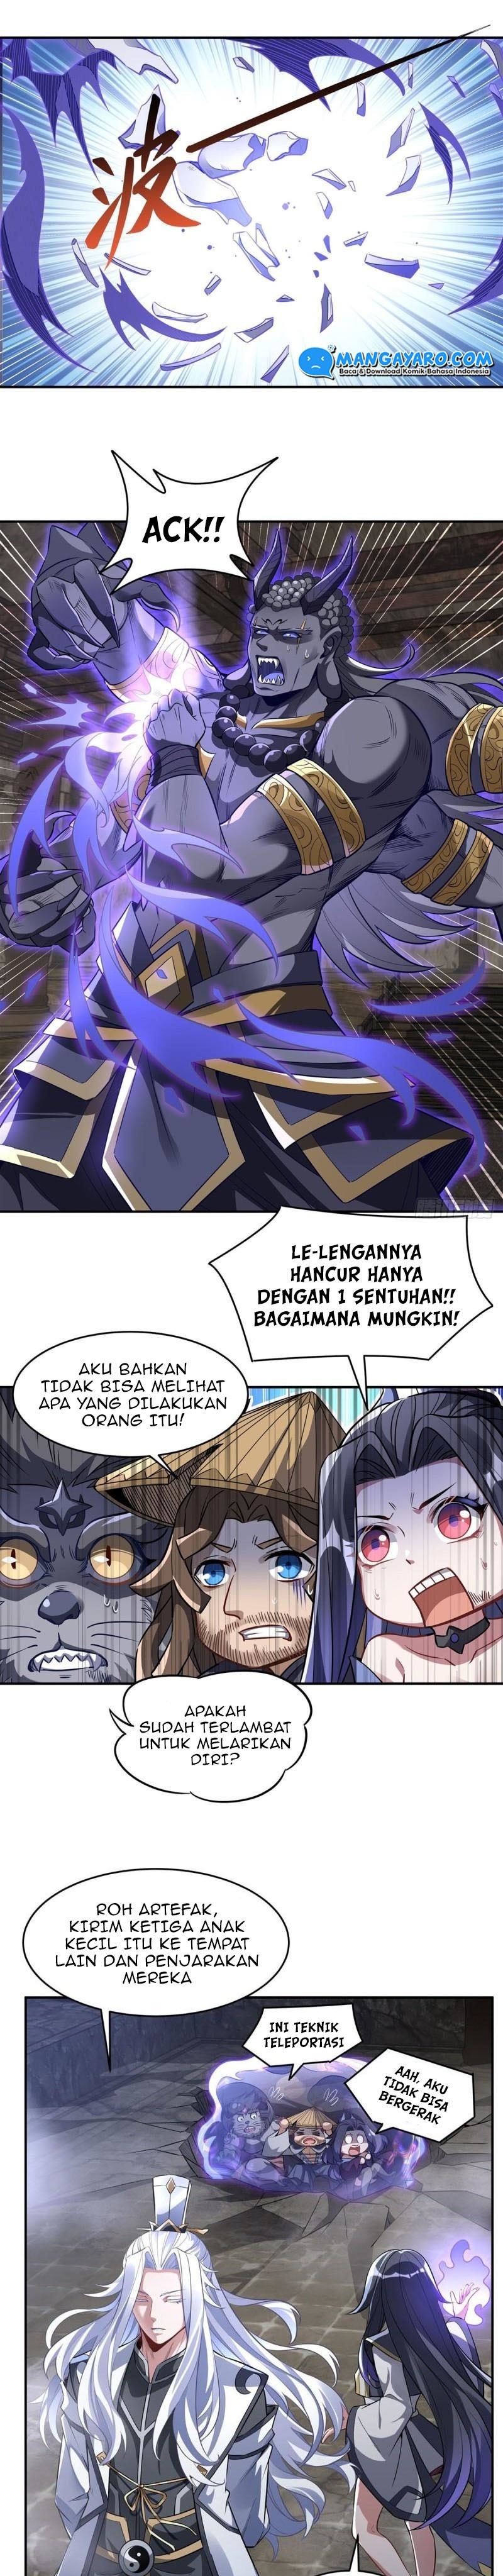 Dilarang COPAS - situs resmi www.mangacanblog.com - Komik my female apprentices are all big shots from the future 069 - chapter 69 70 Indonesia my female apprentices are all big shots from the future 069 - chapter 69 Terbaru 1|Baca Manga Komik Indonesia|Mangacan